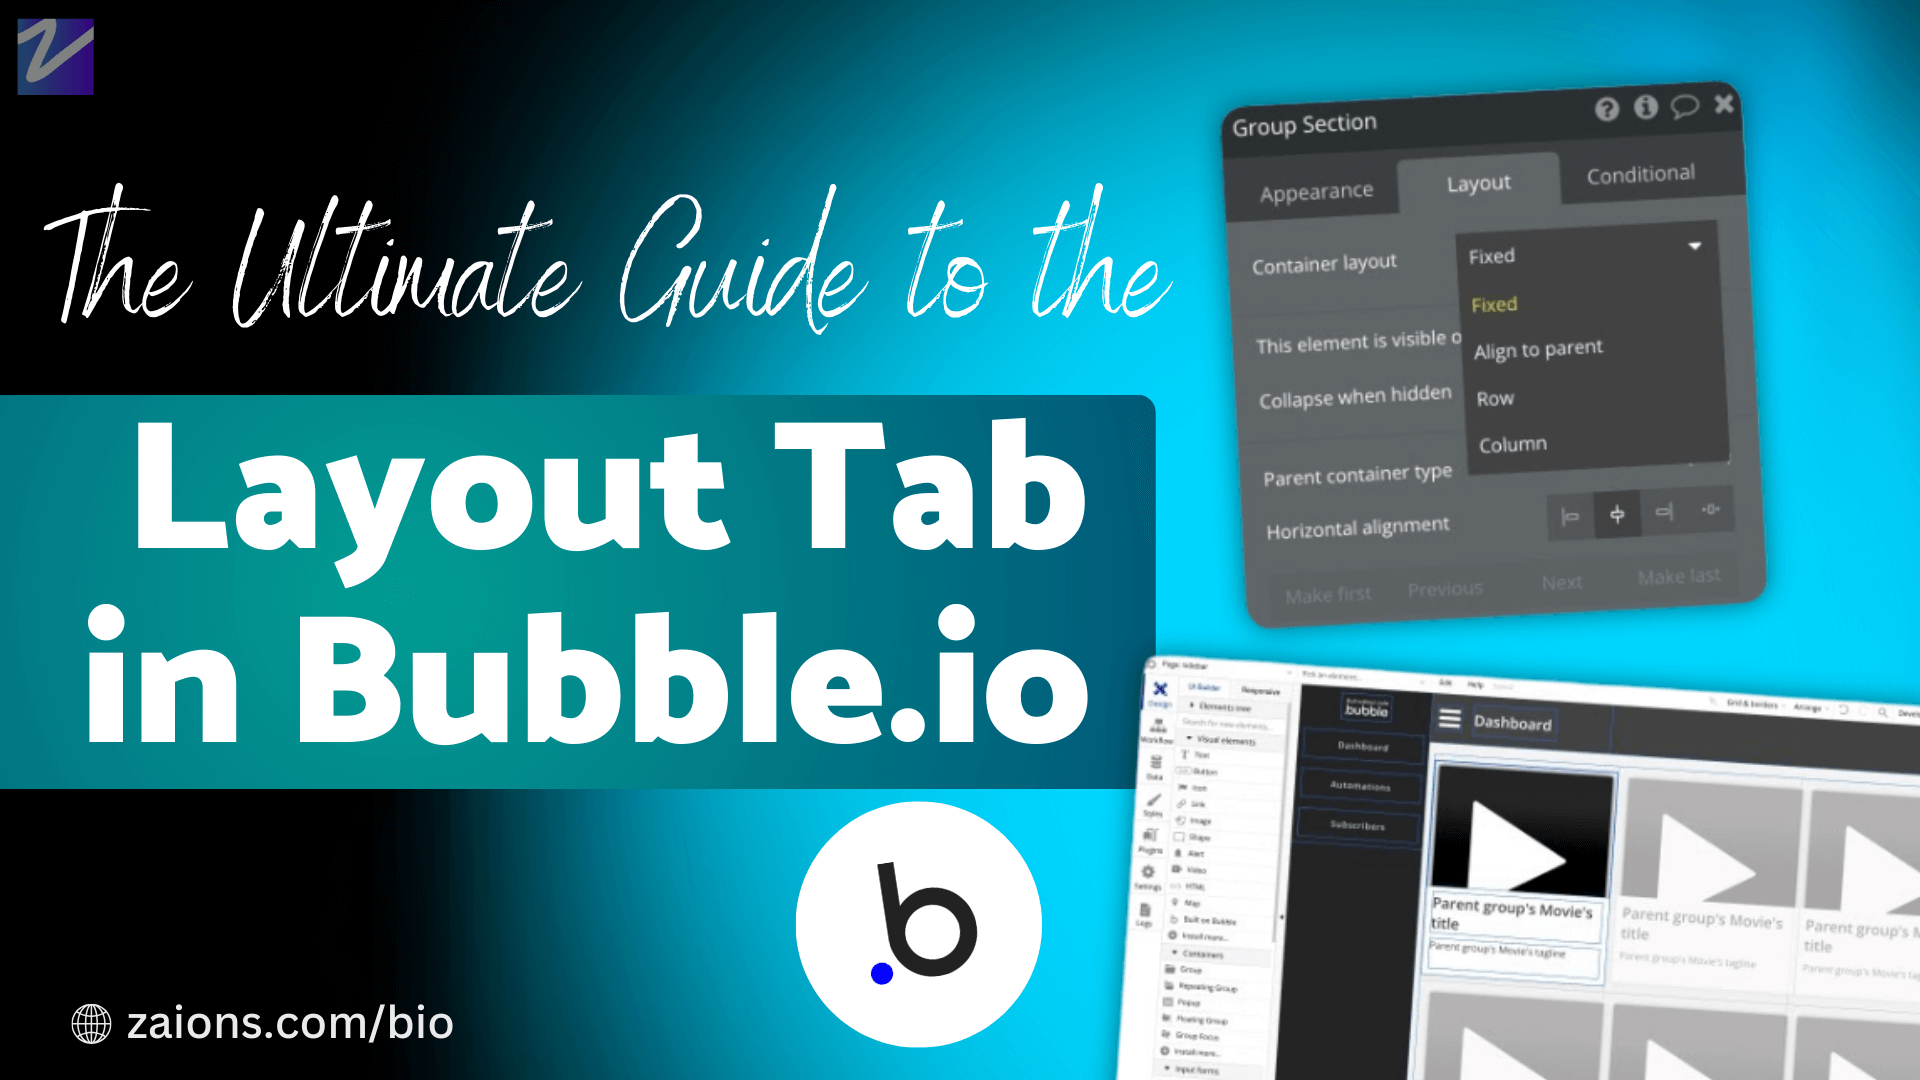 the-ultimate-guide-to-the-layout-tab-in-bubble.io-zaions-aoneahsan